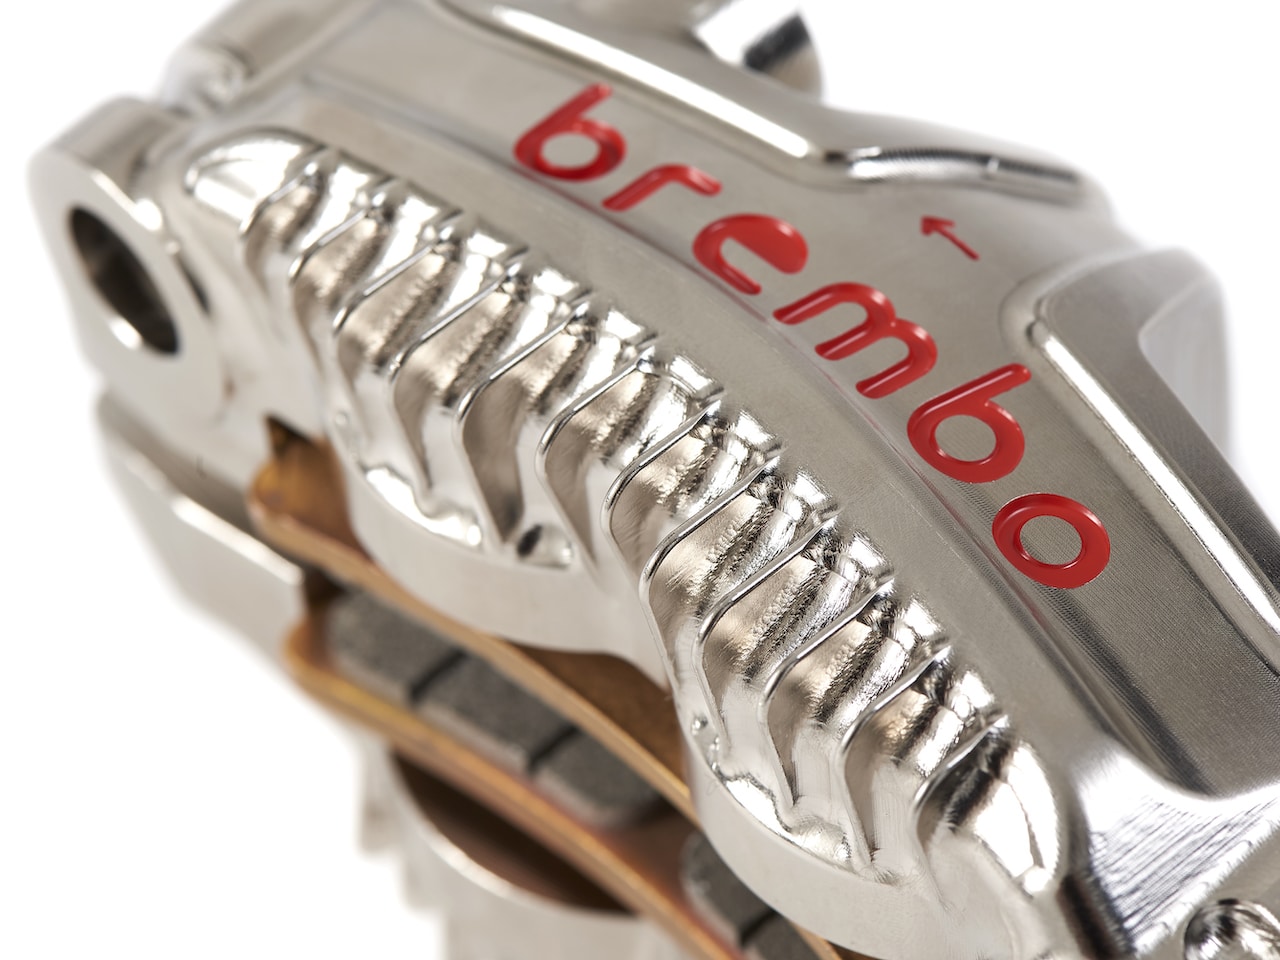 From track to road: the Brembo GP4-MS caliper Returns – raising the bar of sport Riding even higher